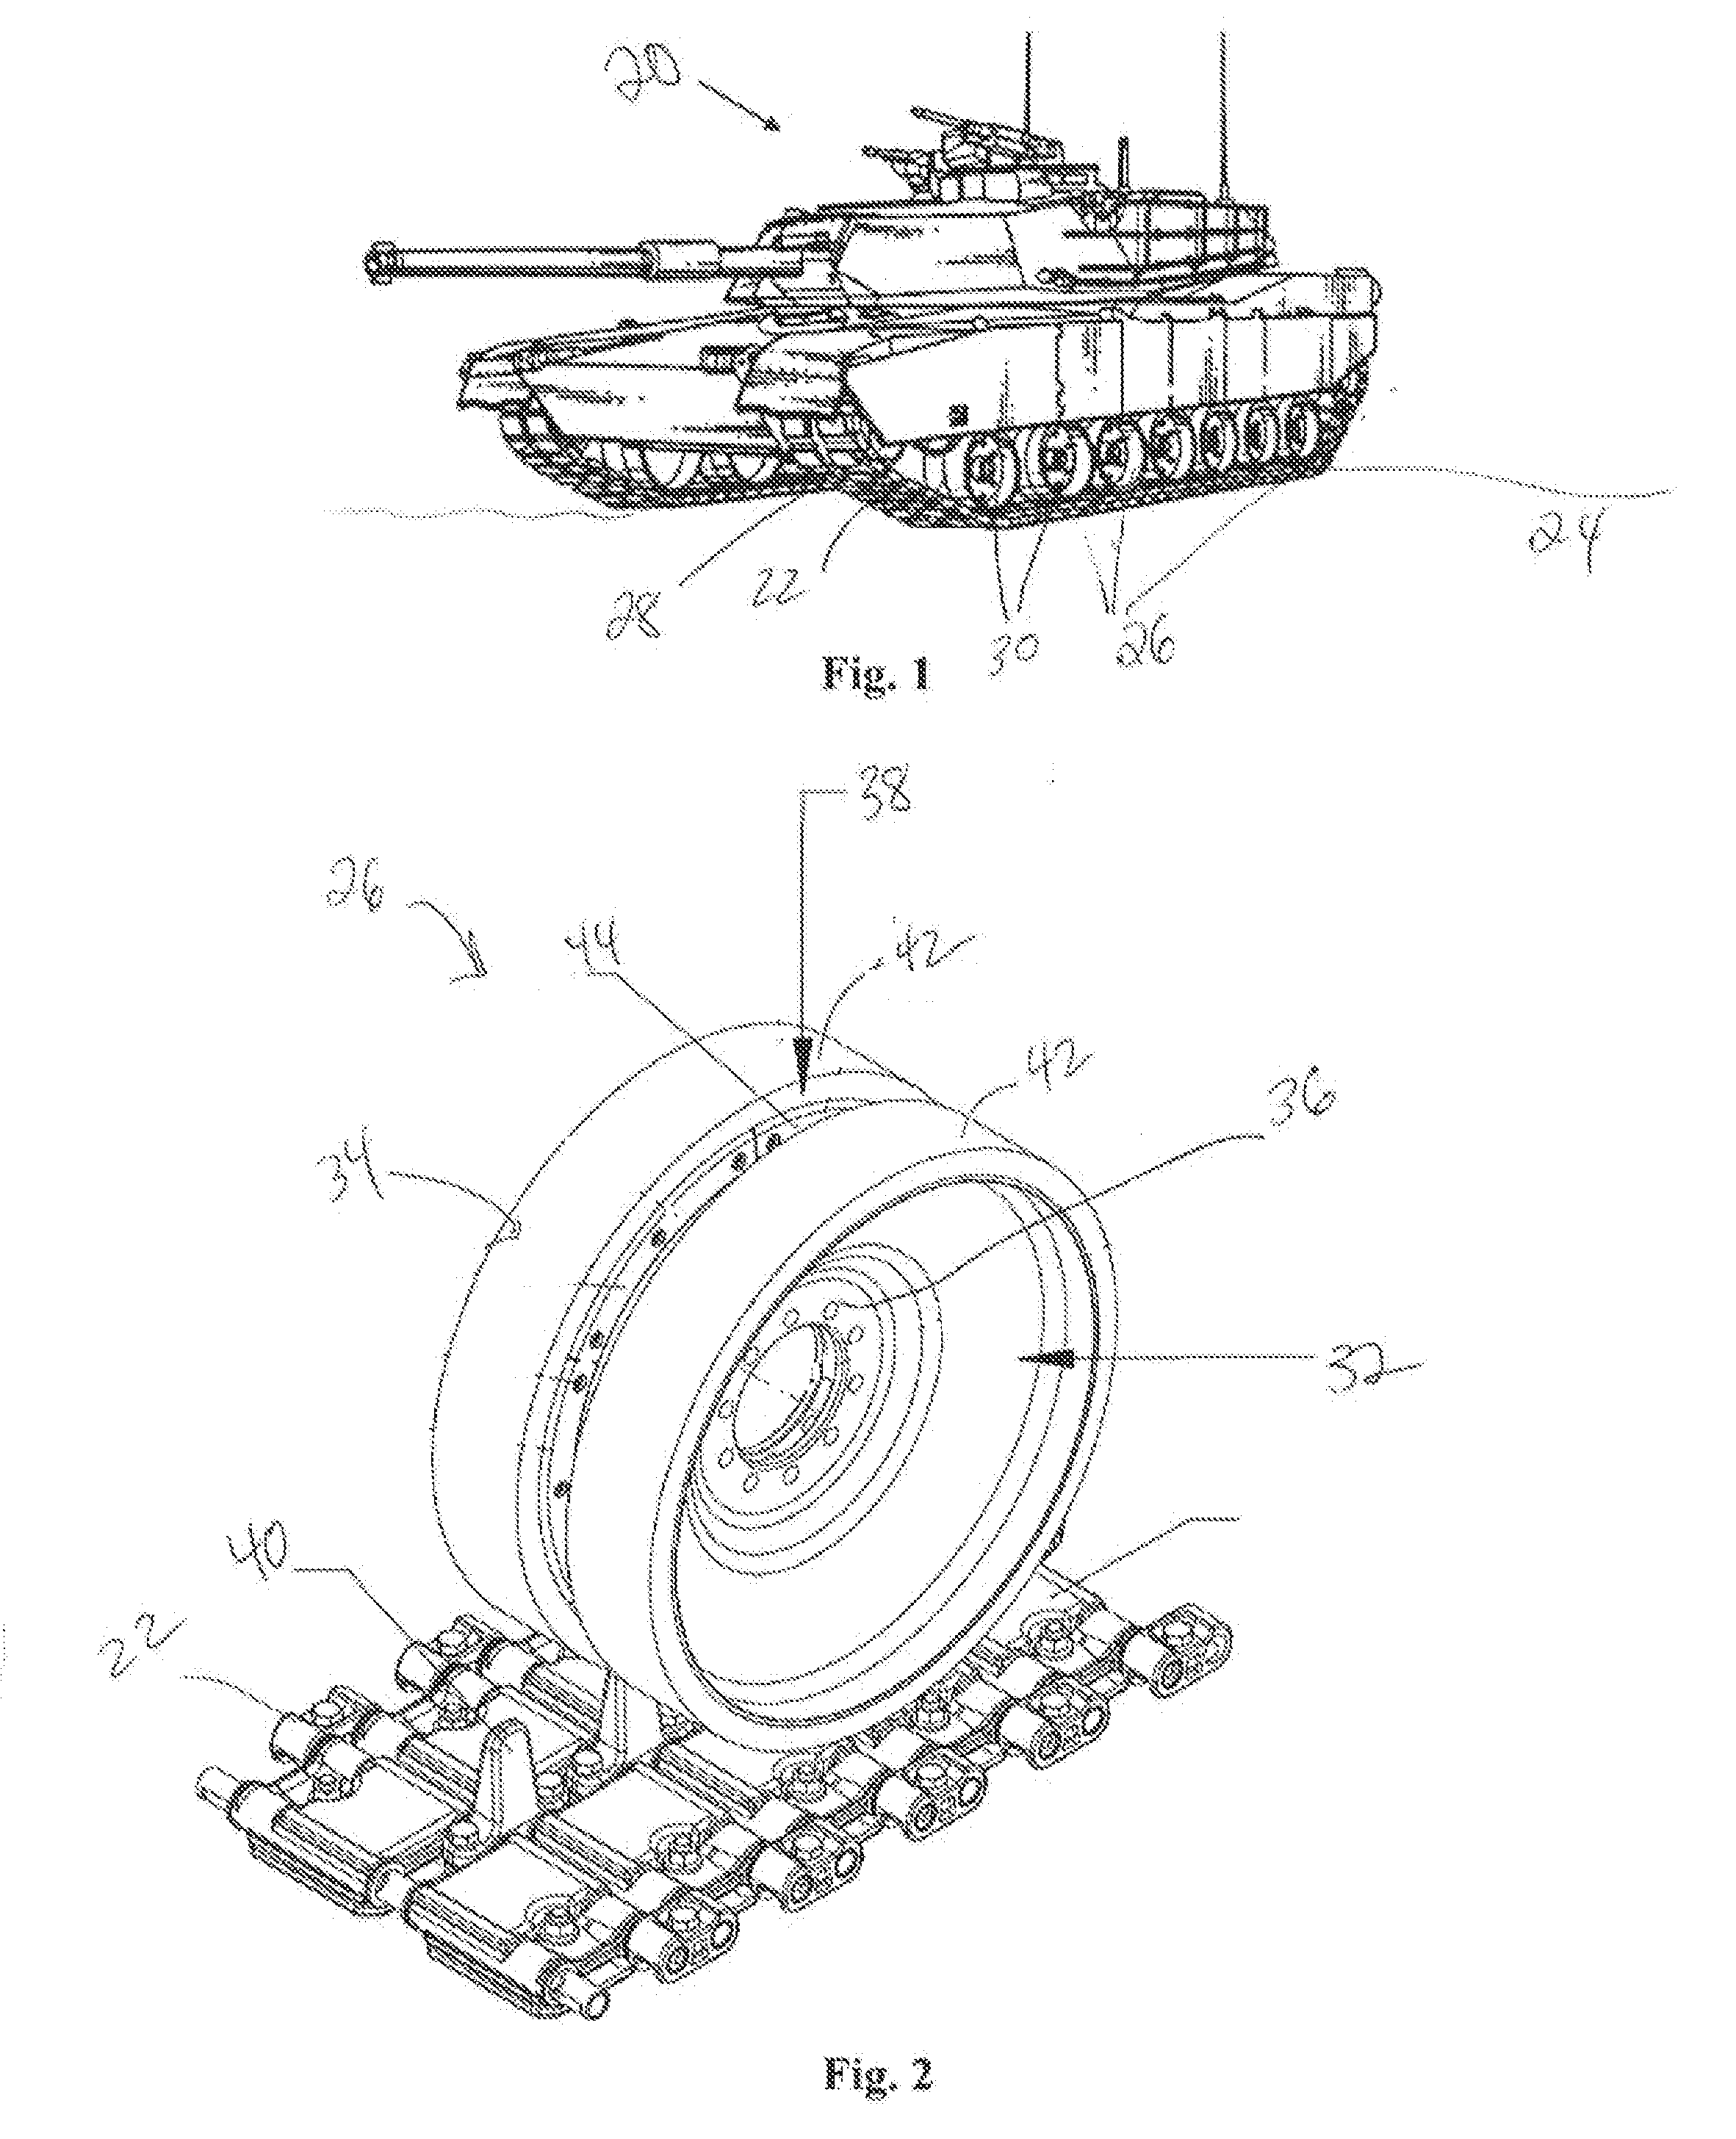 Elastomeric tire for a tracked vehicle